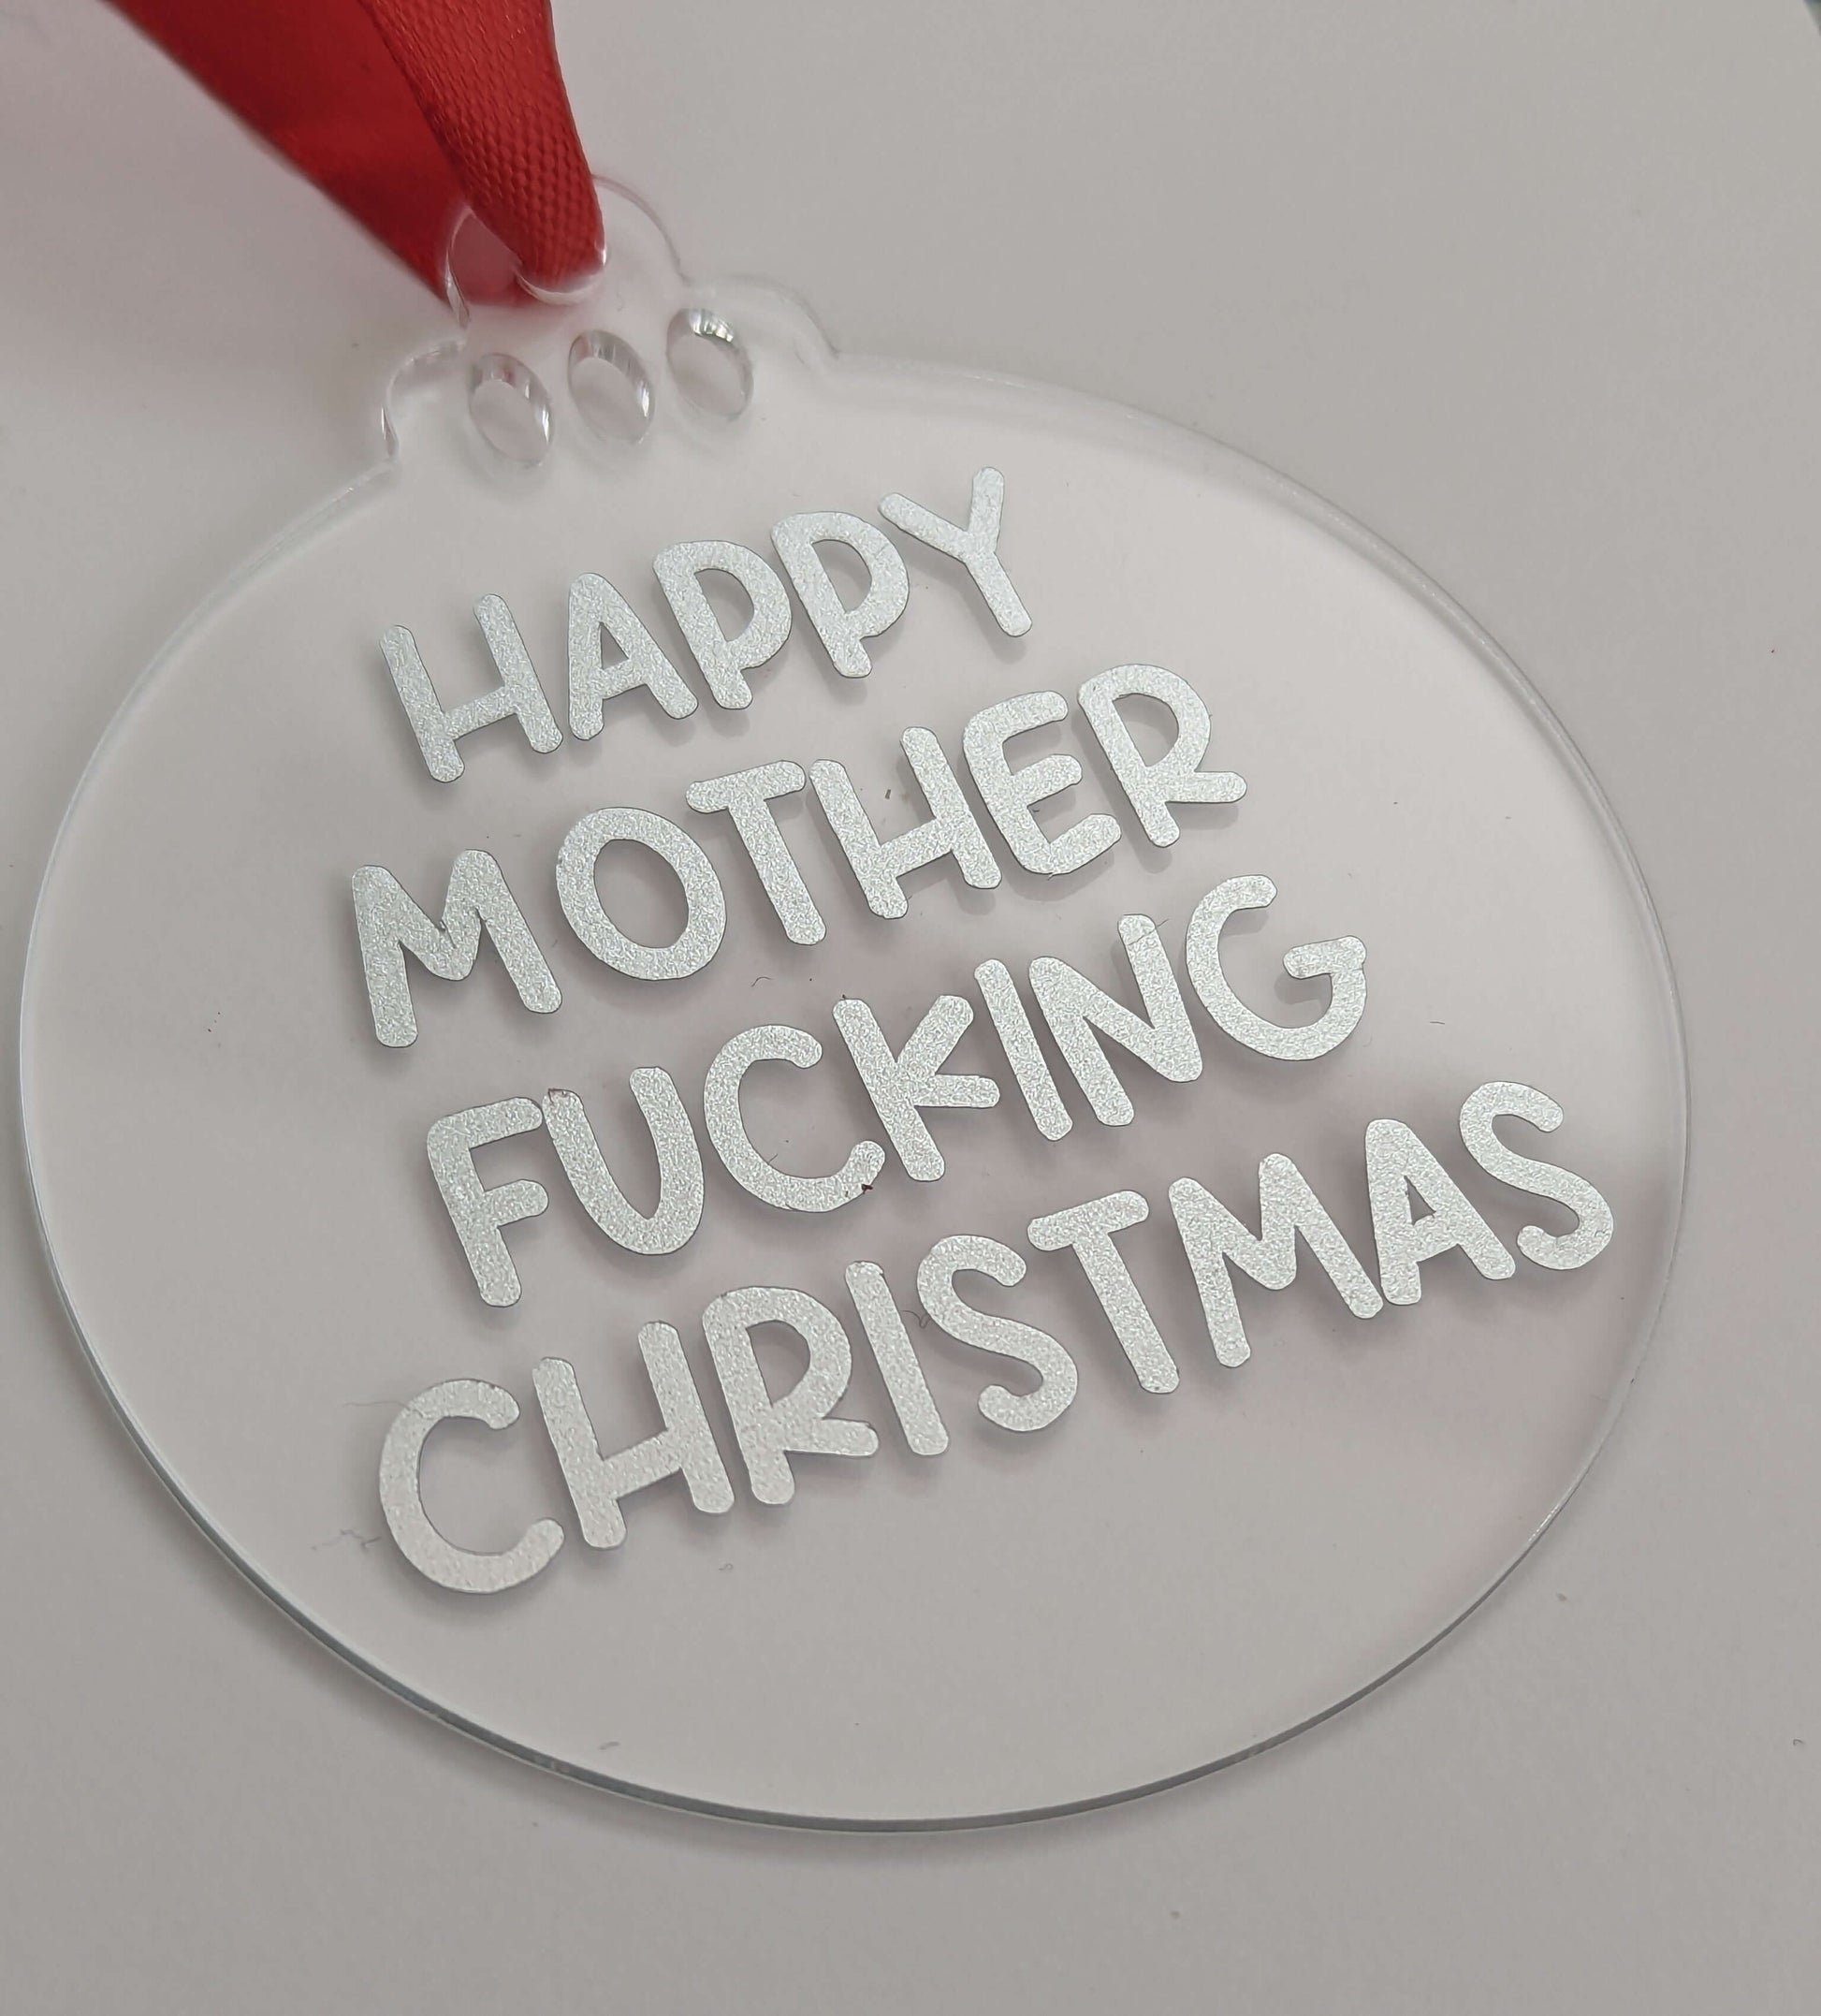 Little Kraken's Happy Mother Fucking Christmas Hanging Decoration, Christmas Decorations for £4.99 each